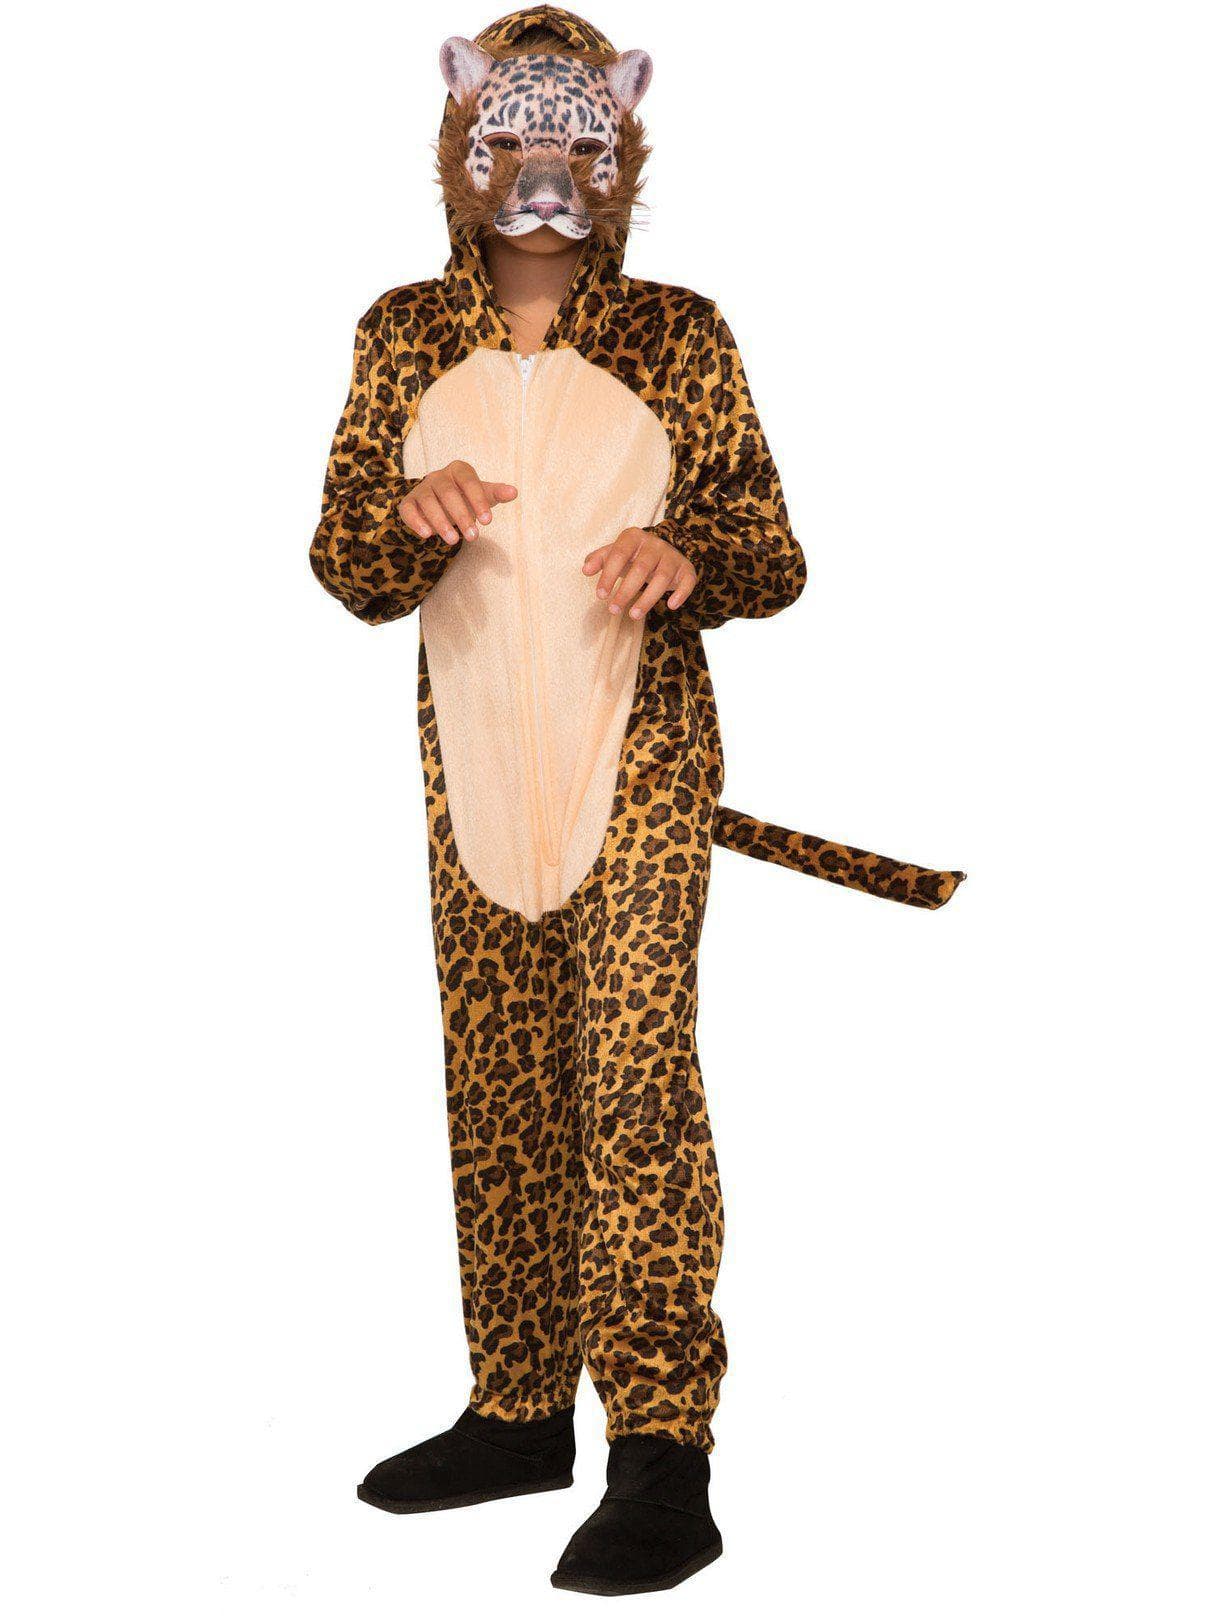 Kid's Leopard Jumpsuit With Mask Costume - costumes.com